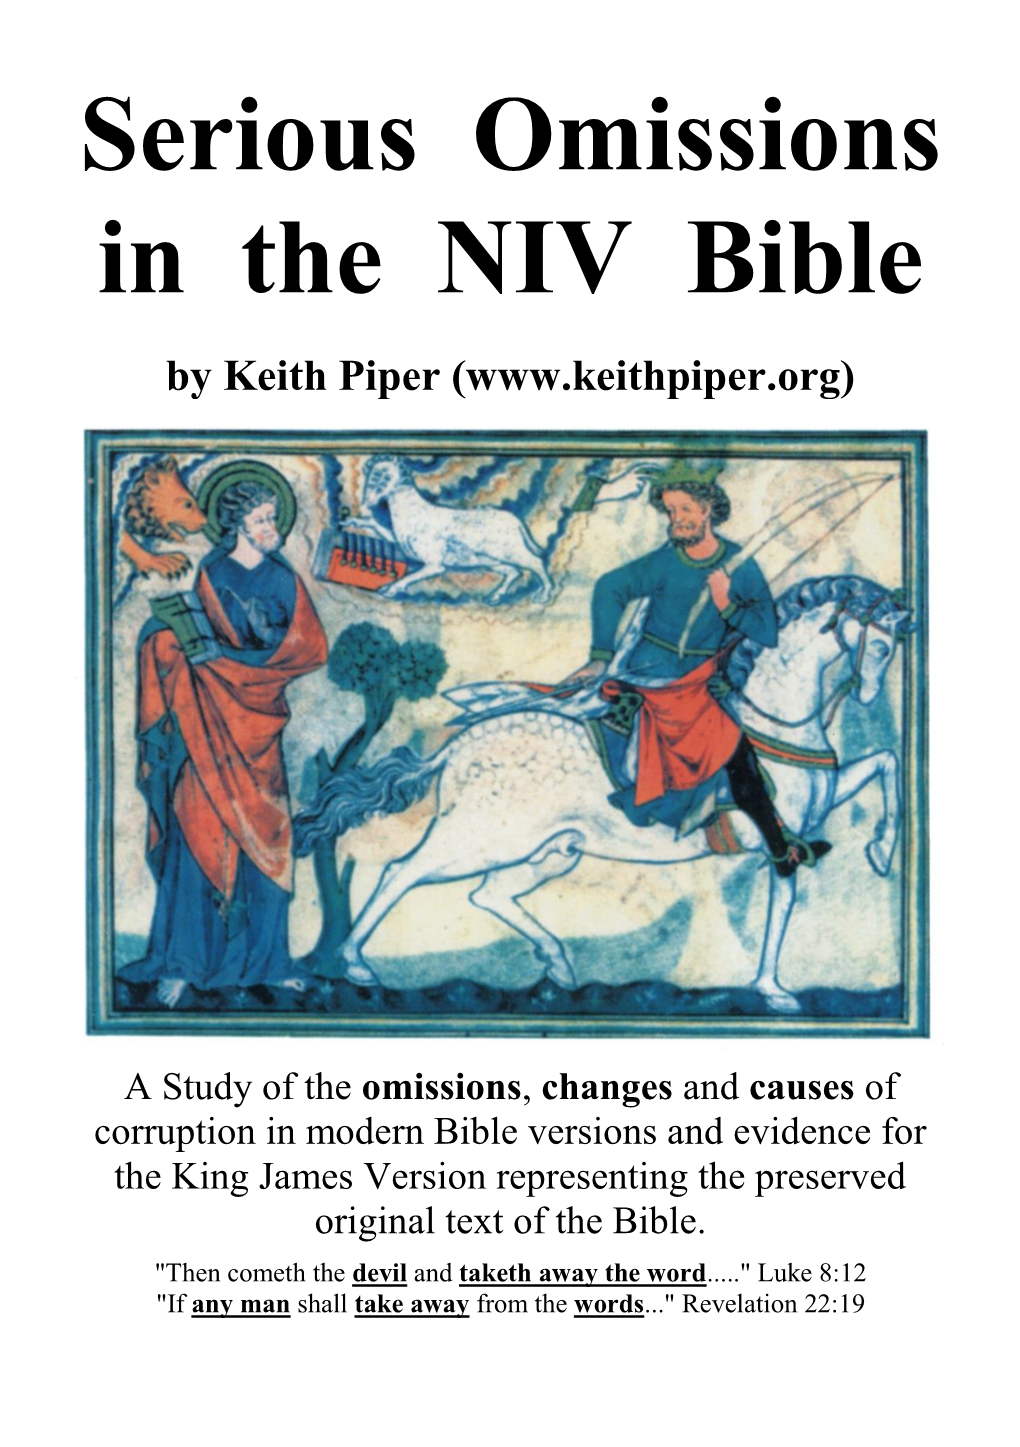 Serious Omissions in the NIV Bible